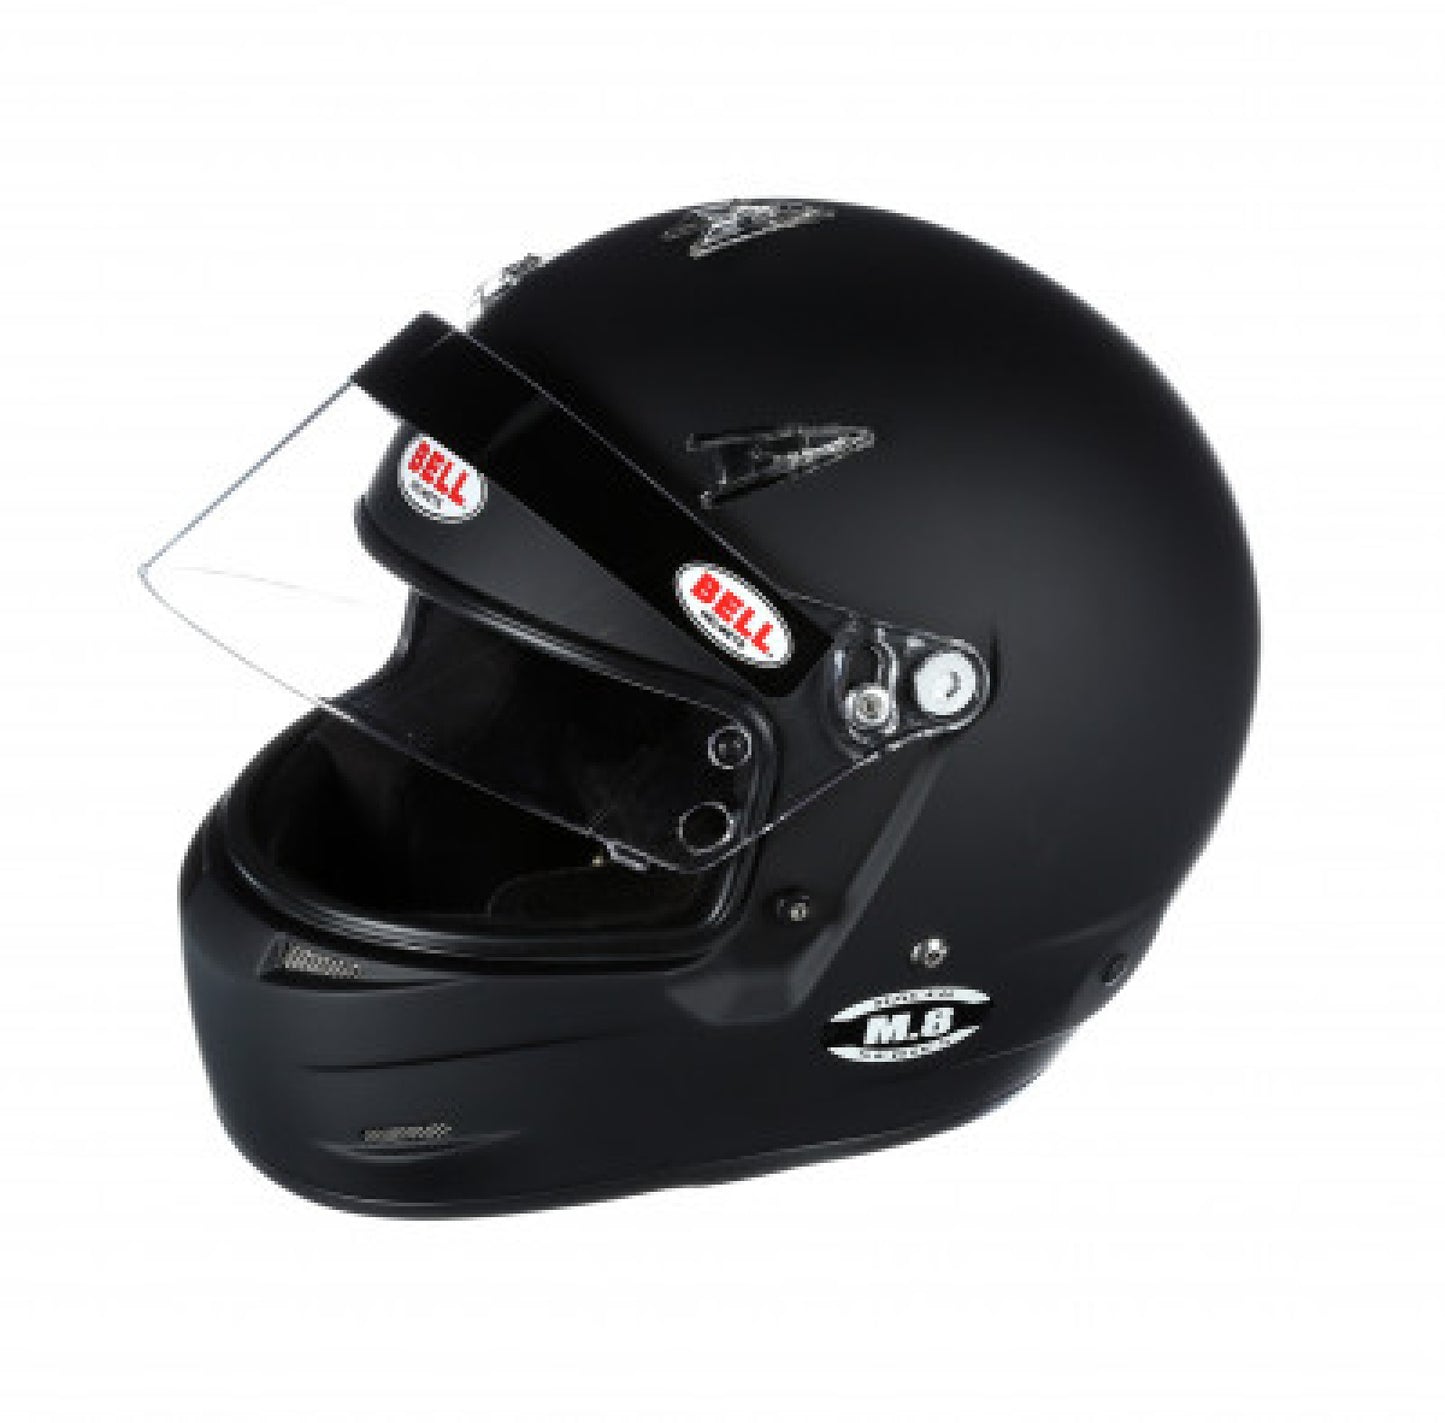 Bell M8 Racing Helmet-Matte Black Size Extra Small 1419A12